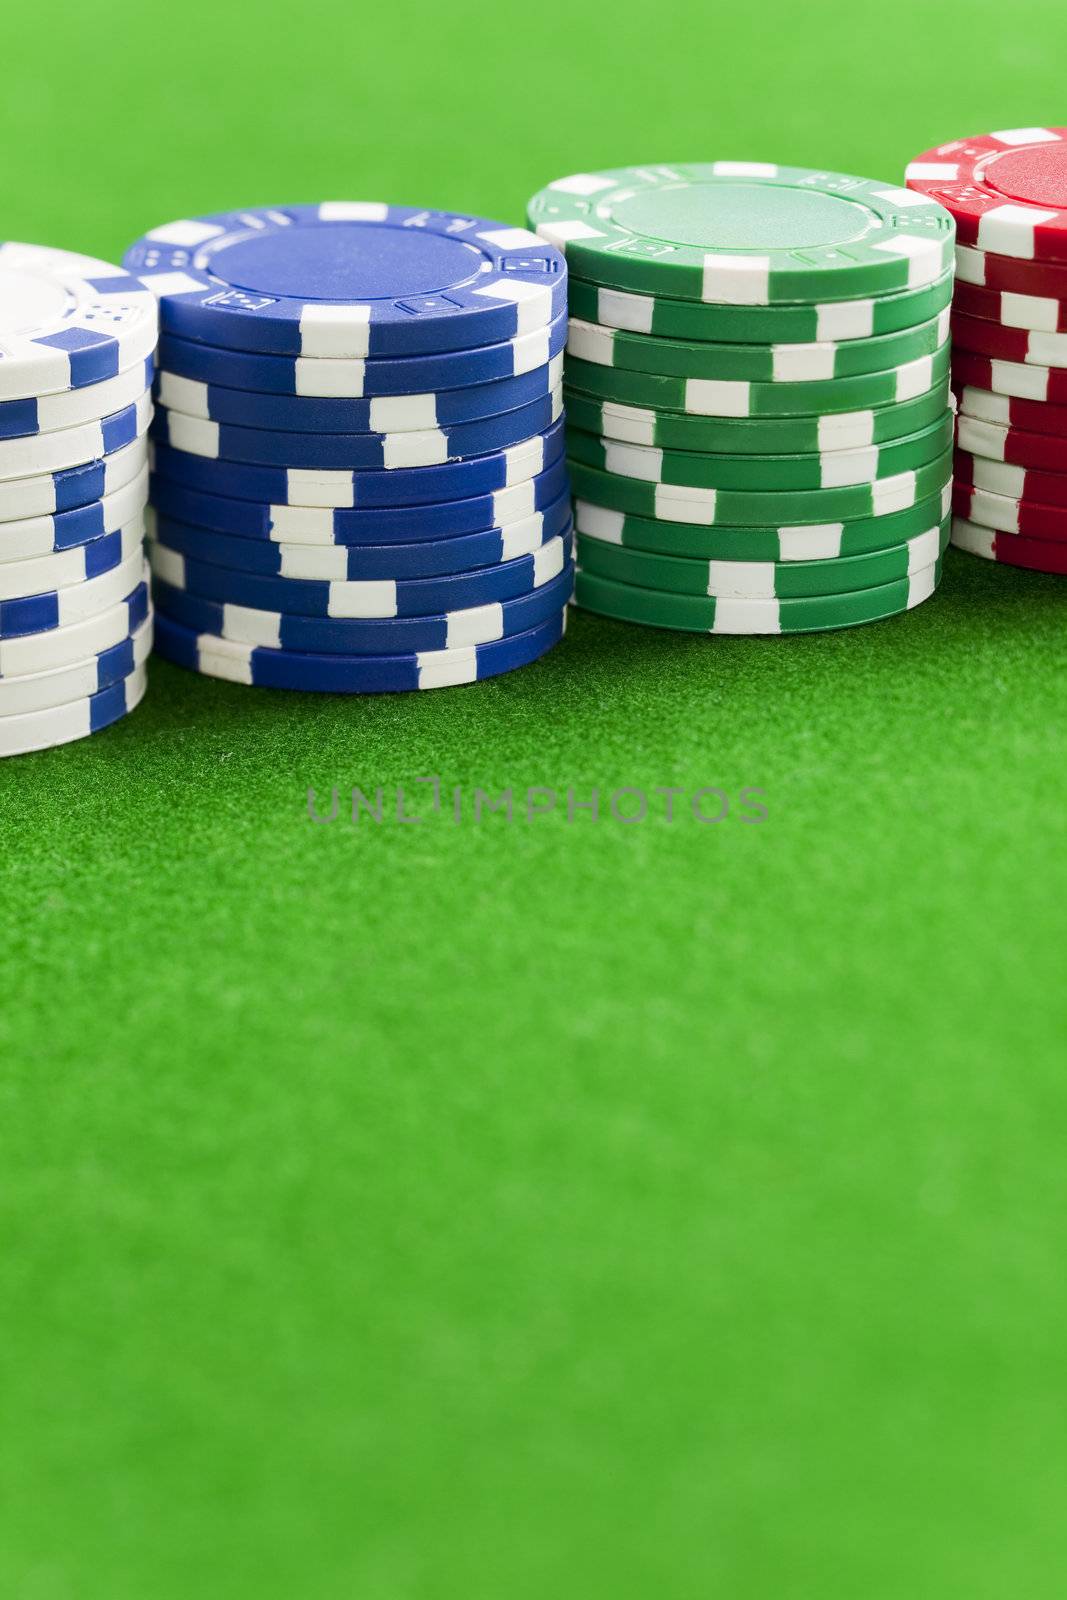 Blank casino chips on the green gaming table